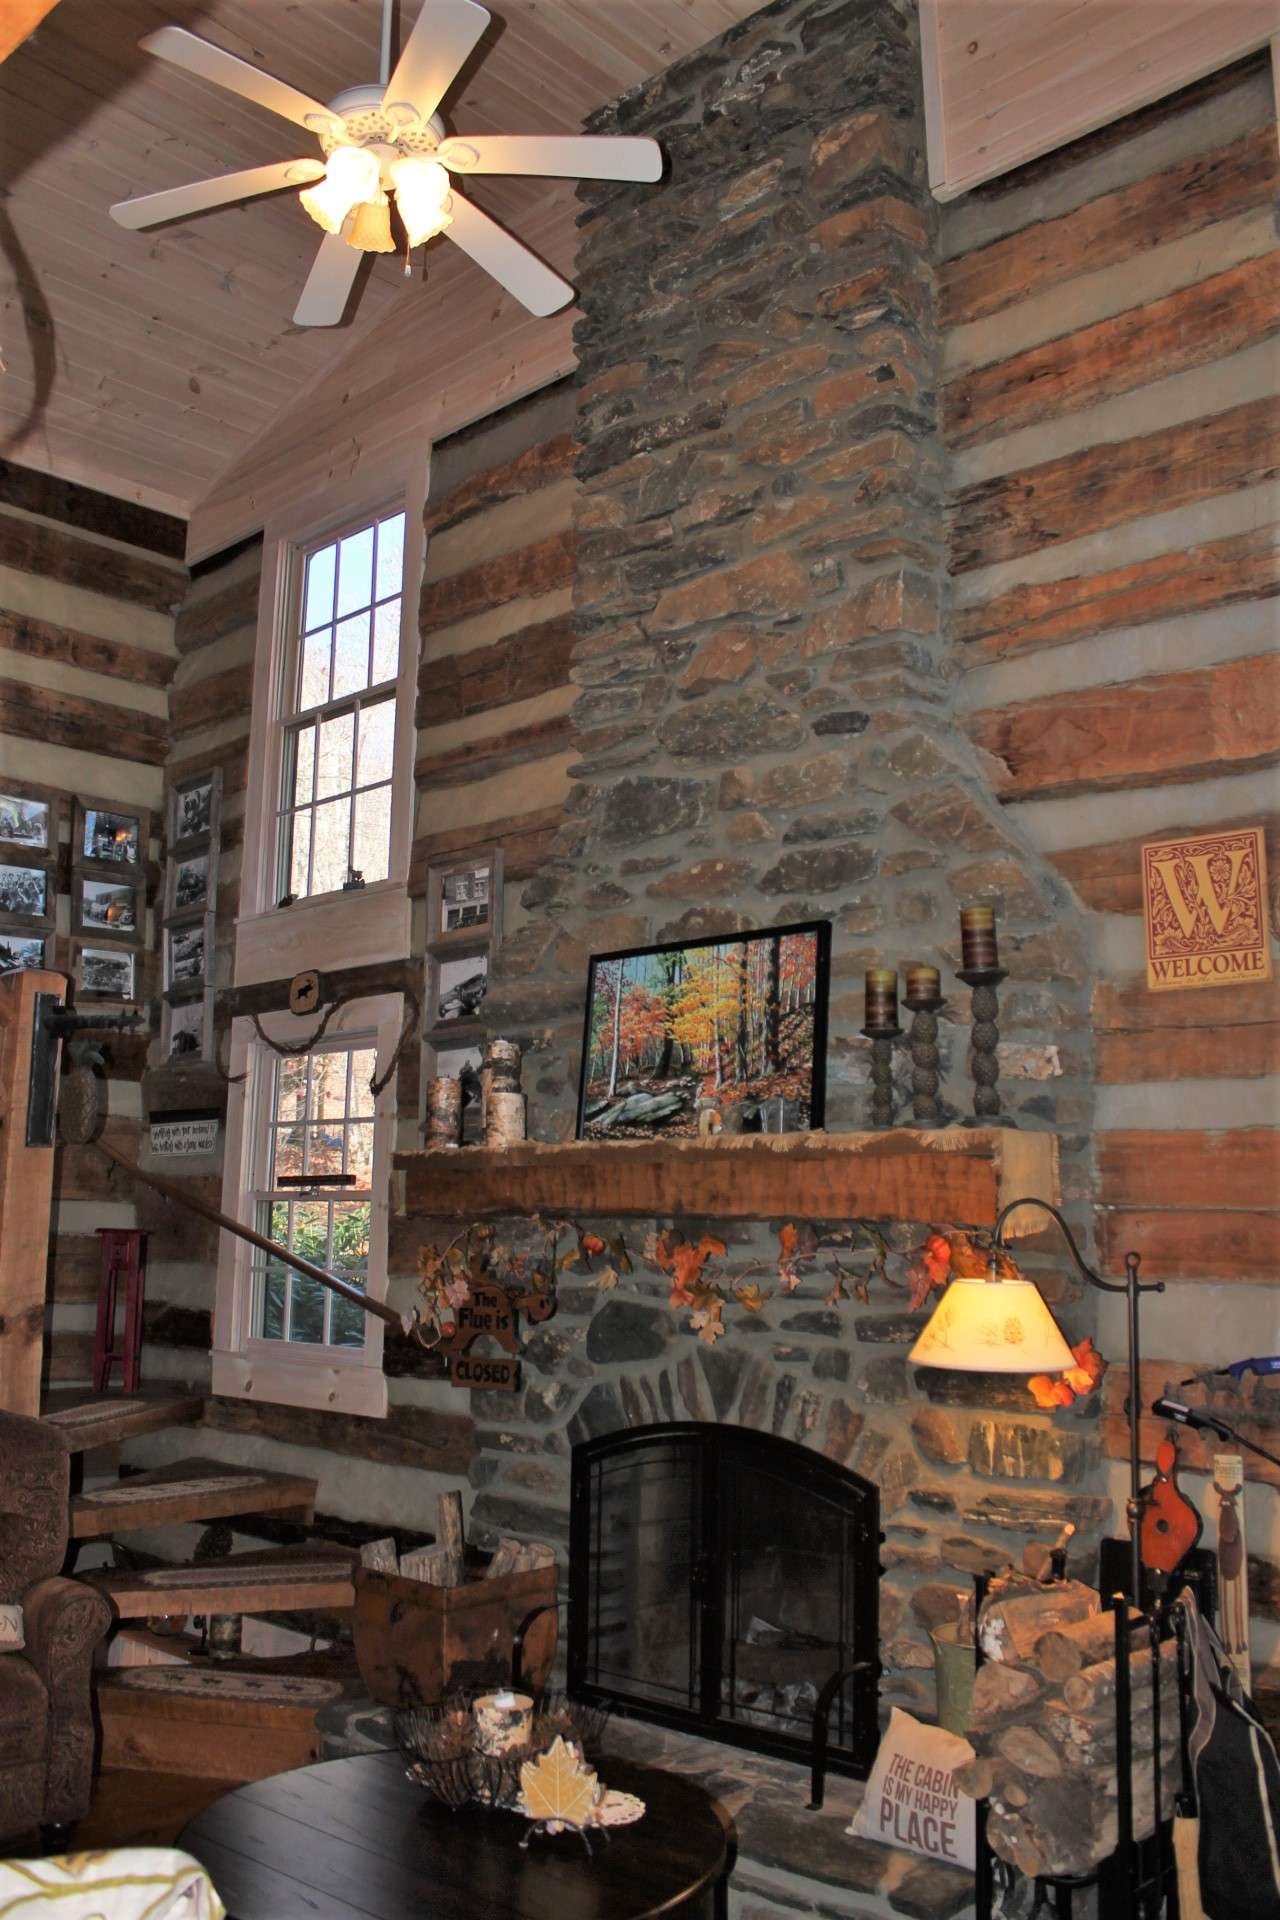 The native stone wood burning fireplace soars to the cathedral ceiling. It has been said that in the old log homes of yesteryear, the hearth was the heart of the home. On a winter's day while relaxing and listening to the crackling fire, we are convinced that is still true today.